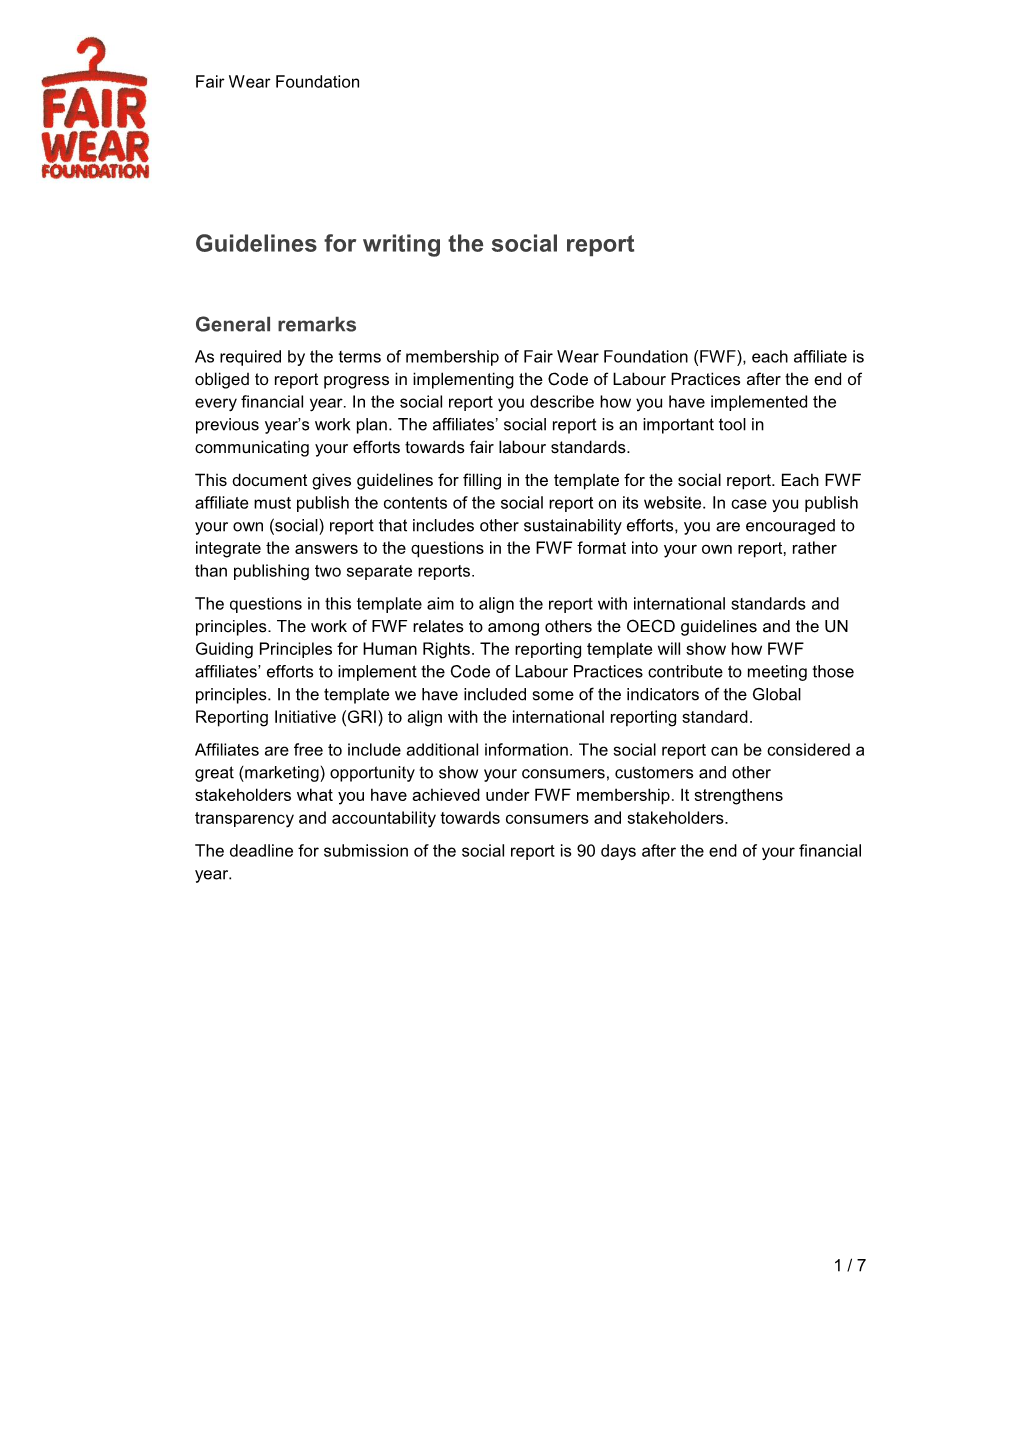 Guidelines for Writing the Social Report